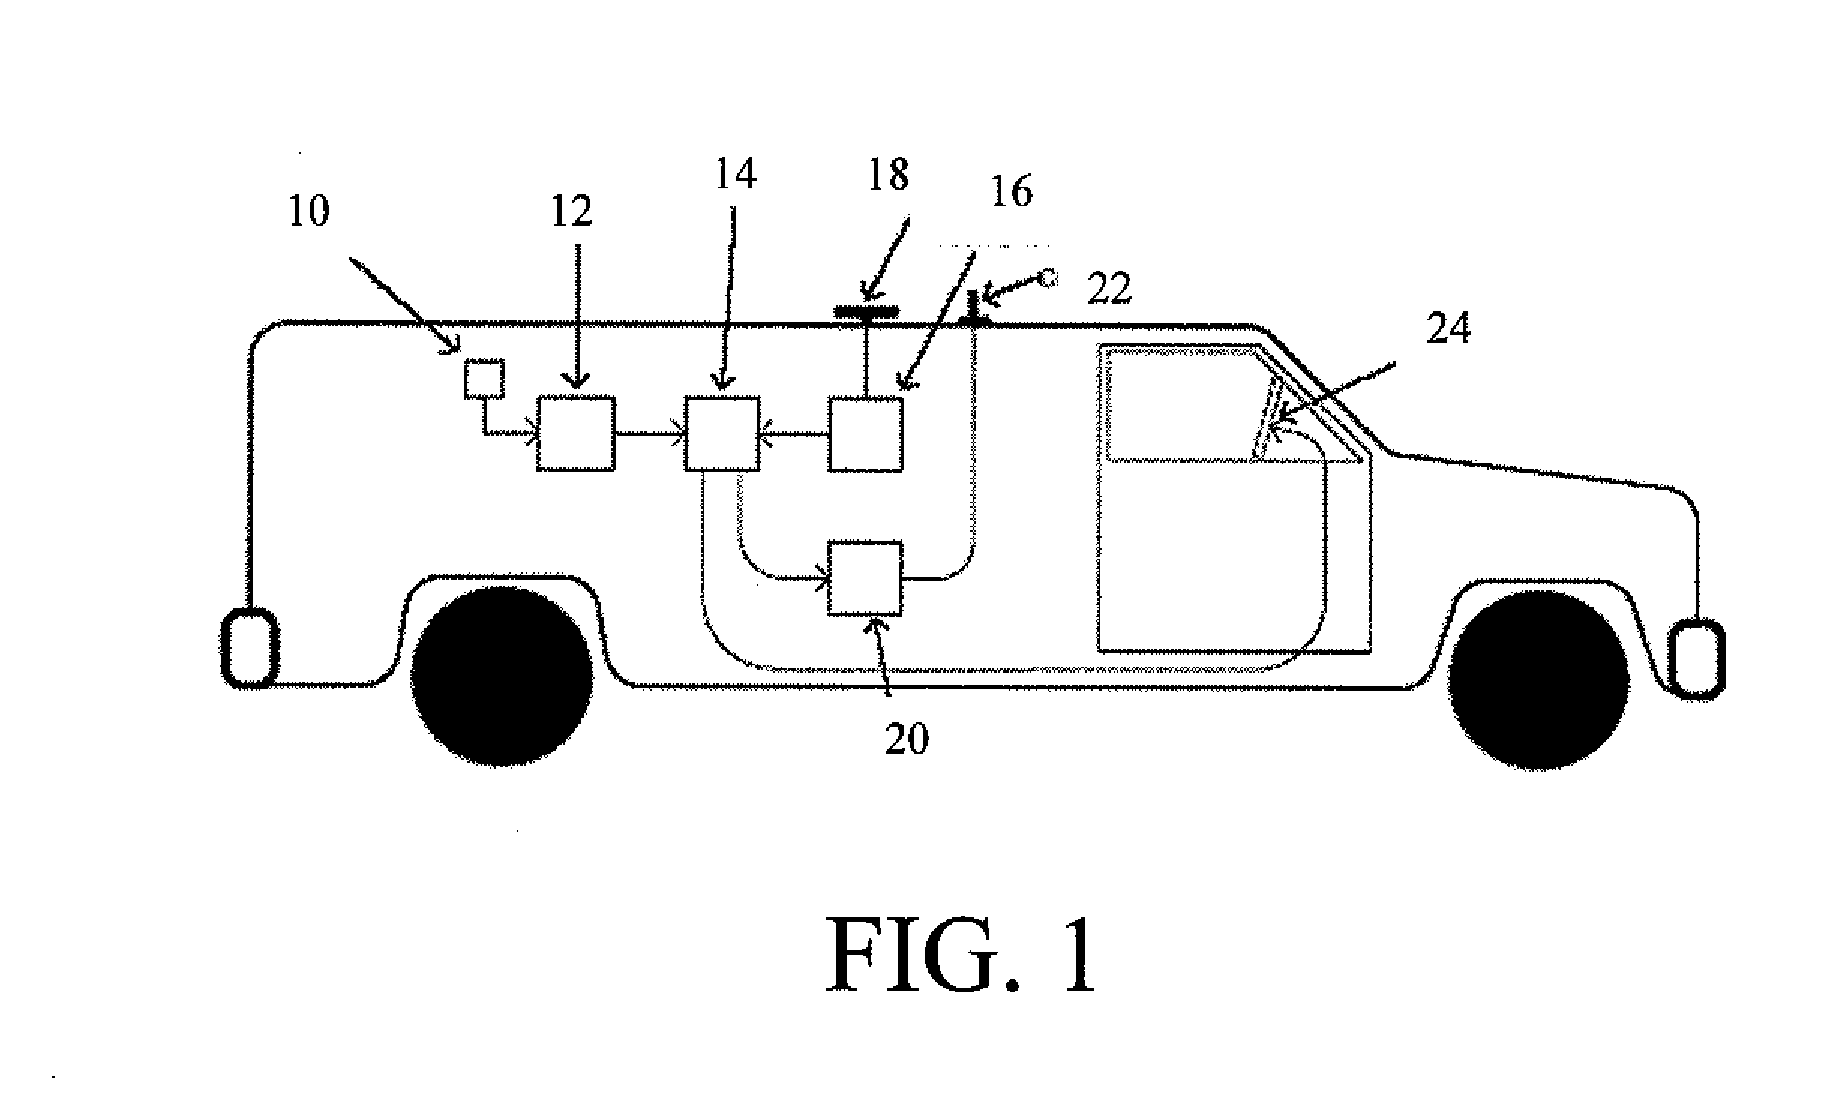 Radiation detection device, system and related methods